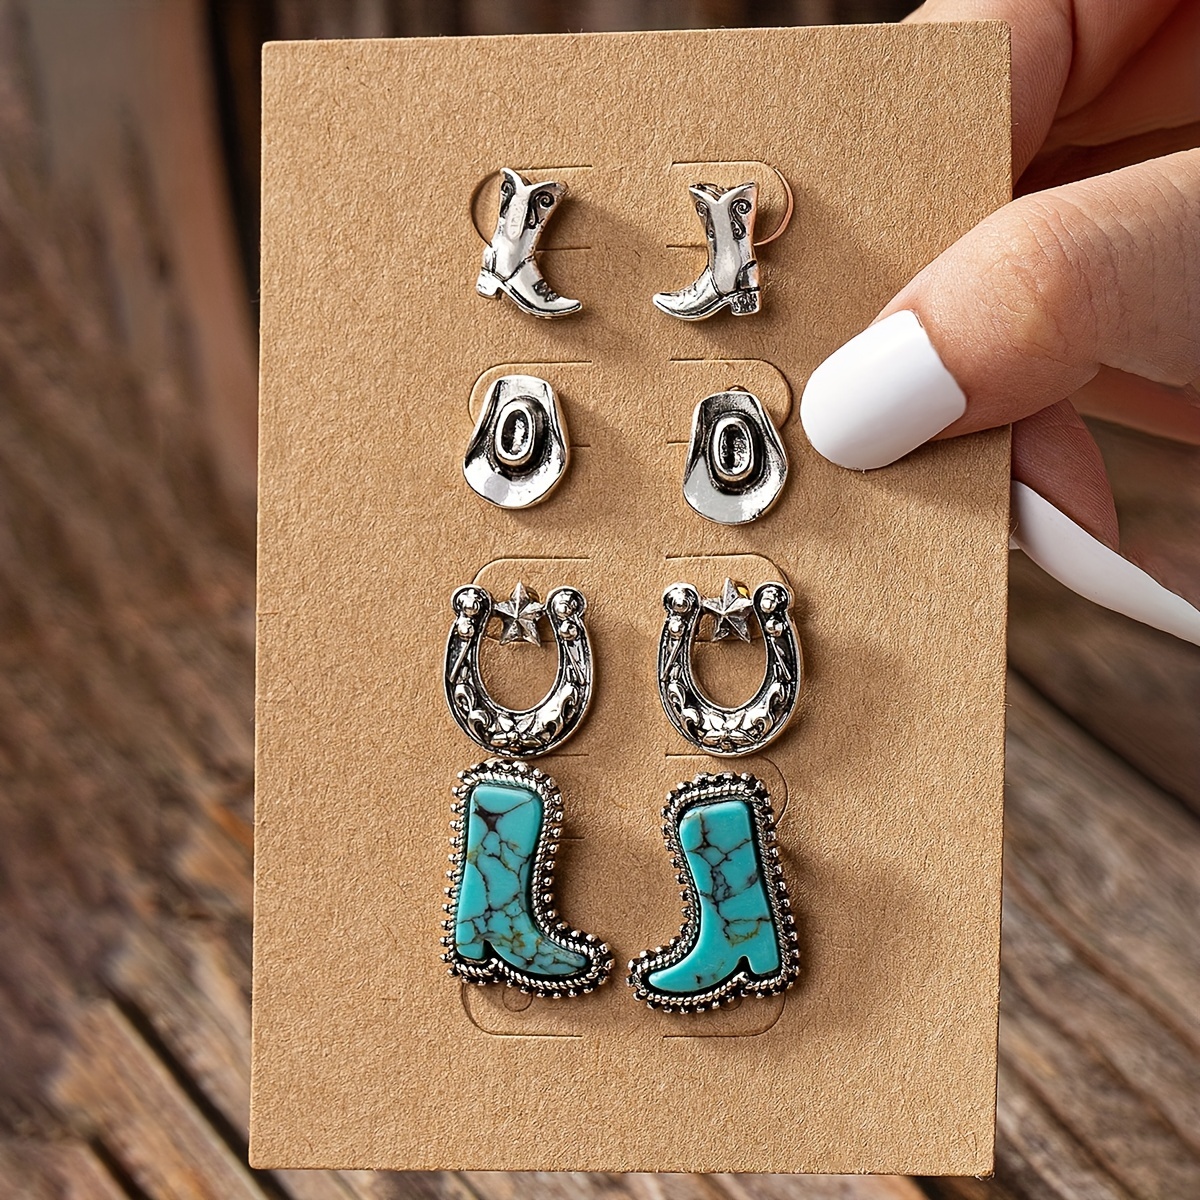 

5 Pairs Western Cowboy Style Horse Star Sun Shaped Turquoise Stone Inlaid Studs Hoop Earrings Set For Women Girls Zinc Alloy Jewelry